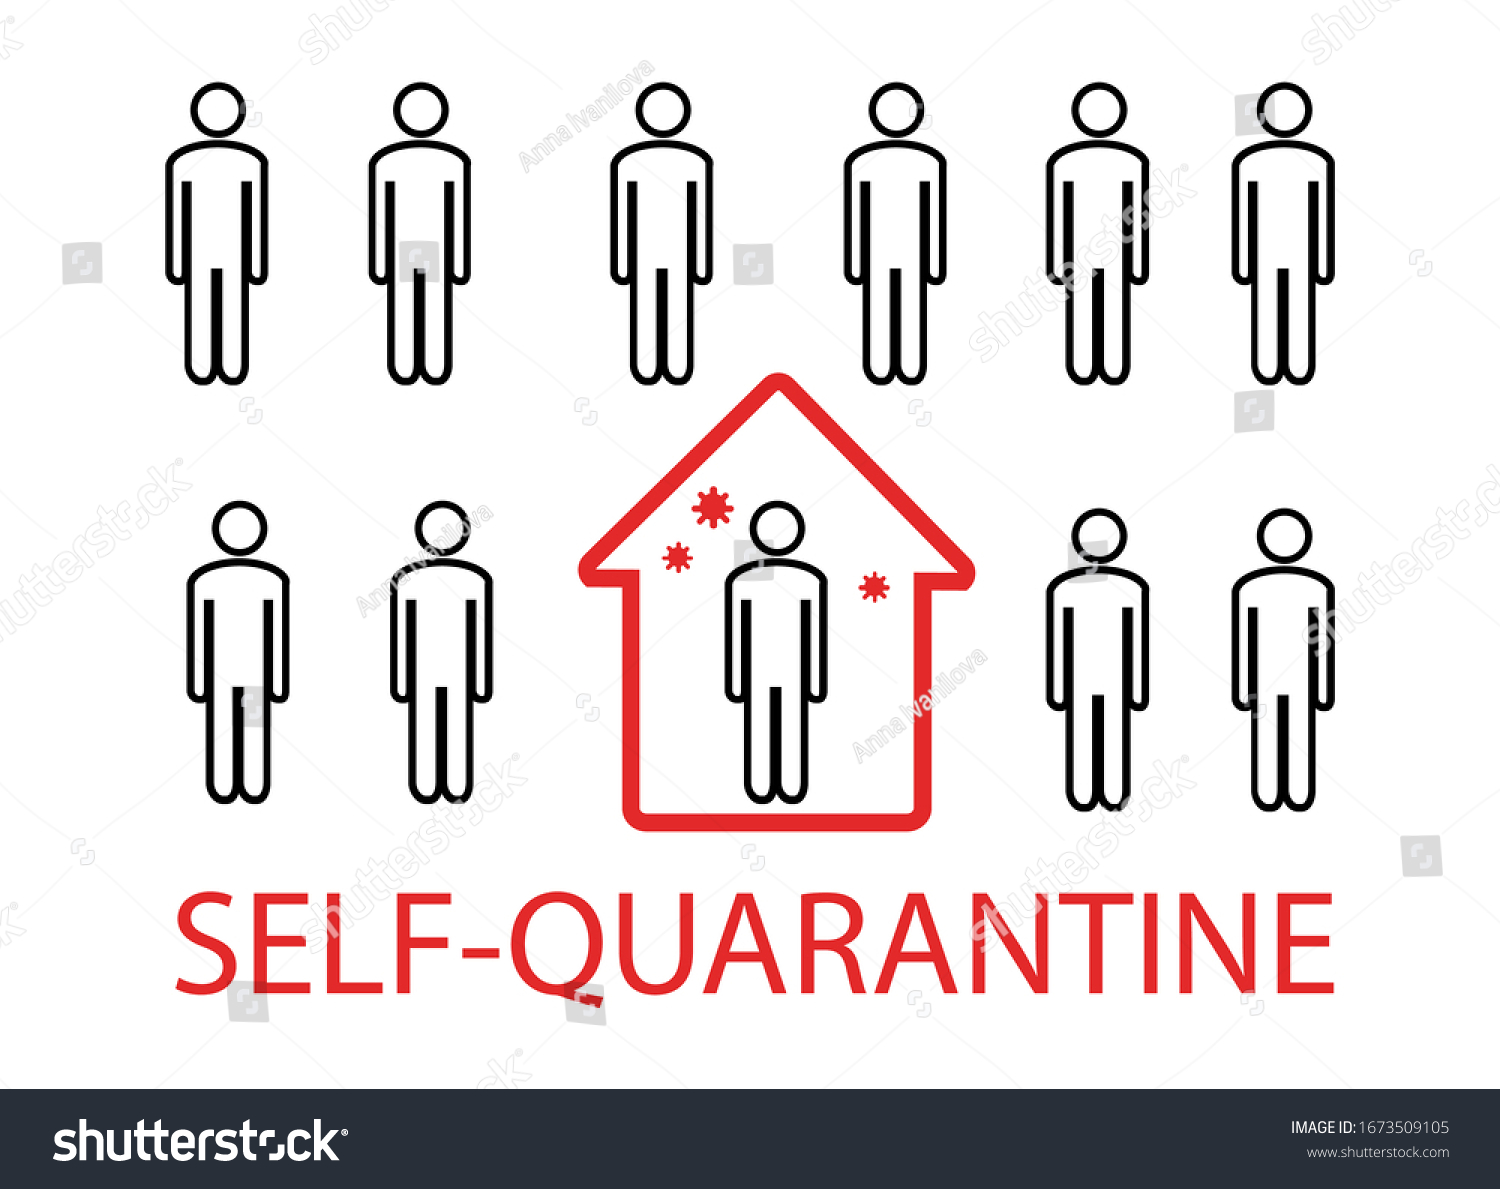 Coronavirus. Self-quarantine. Home quarantine from Covid-19. Recommendation to prevent spreading coronavirus. Crowd of people and an ill man isolated at home. Vector illustration, poster. #1673509105